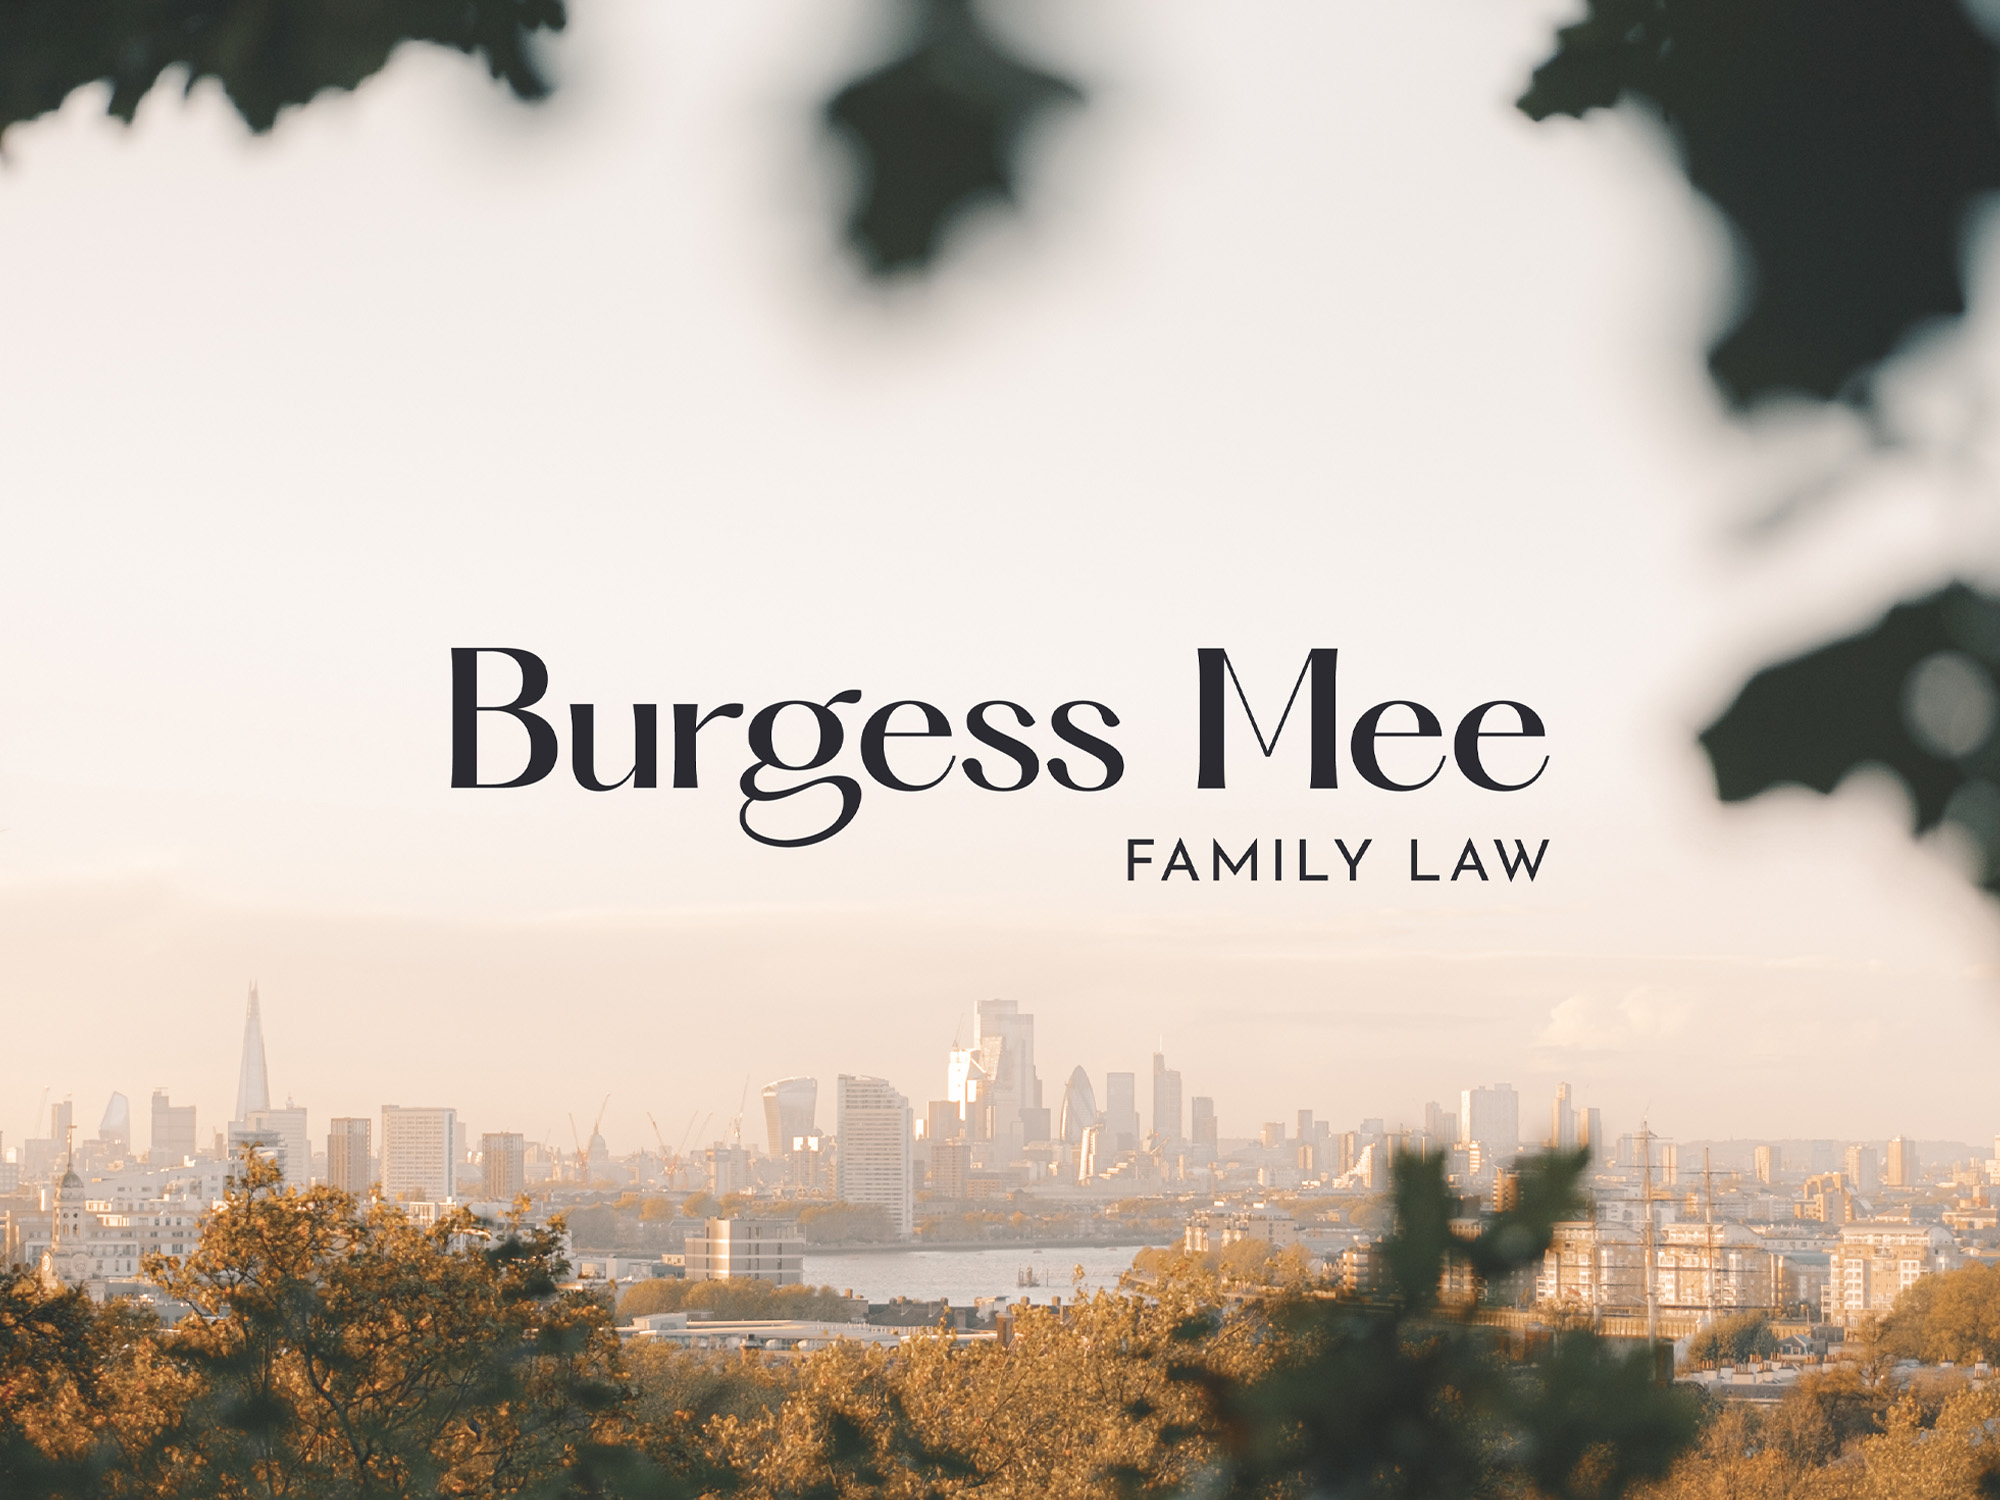 City skyline with trees in view looking over the water. Burgess Mee family law logo on top.